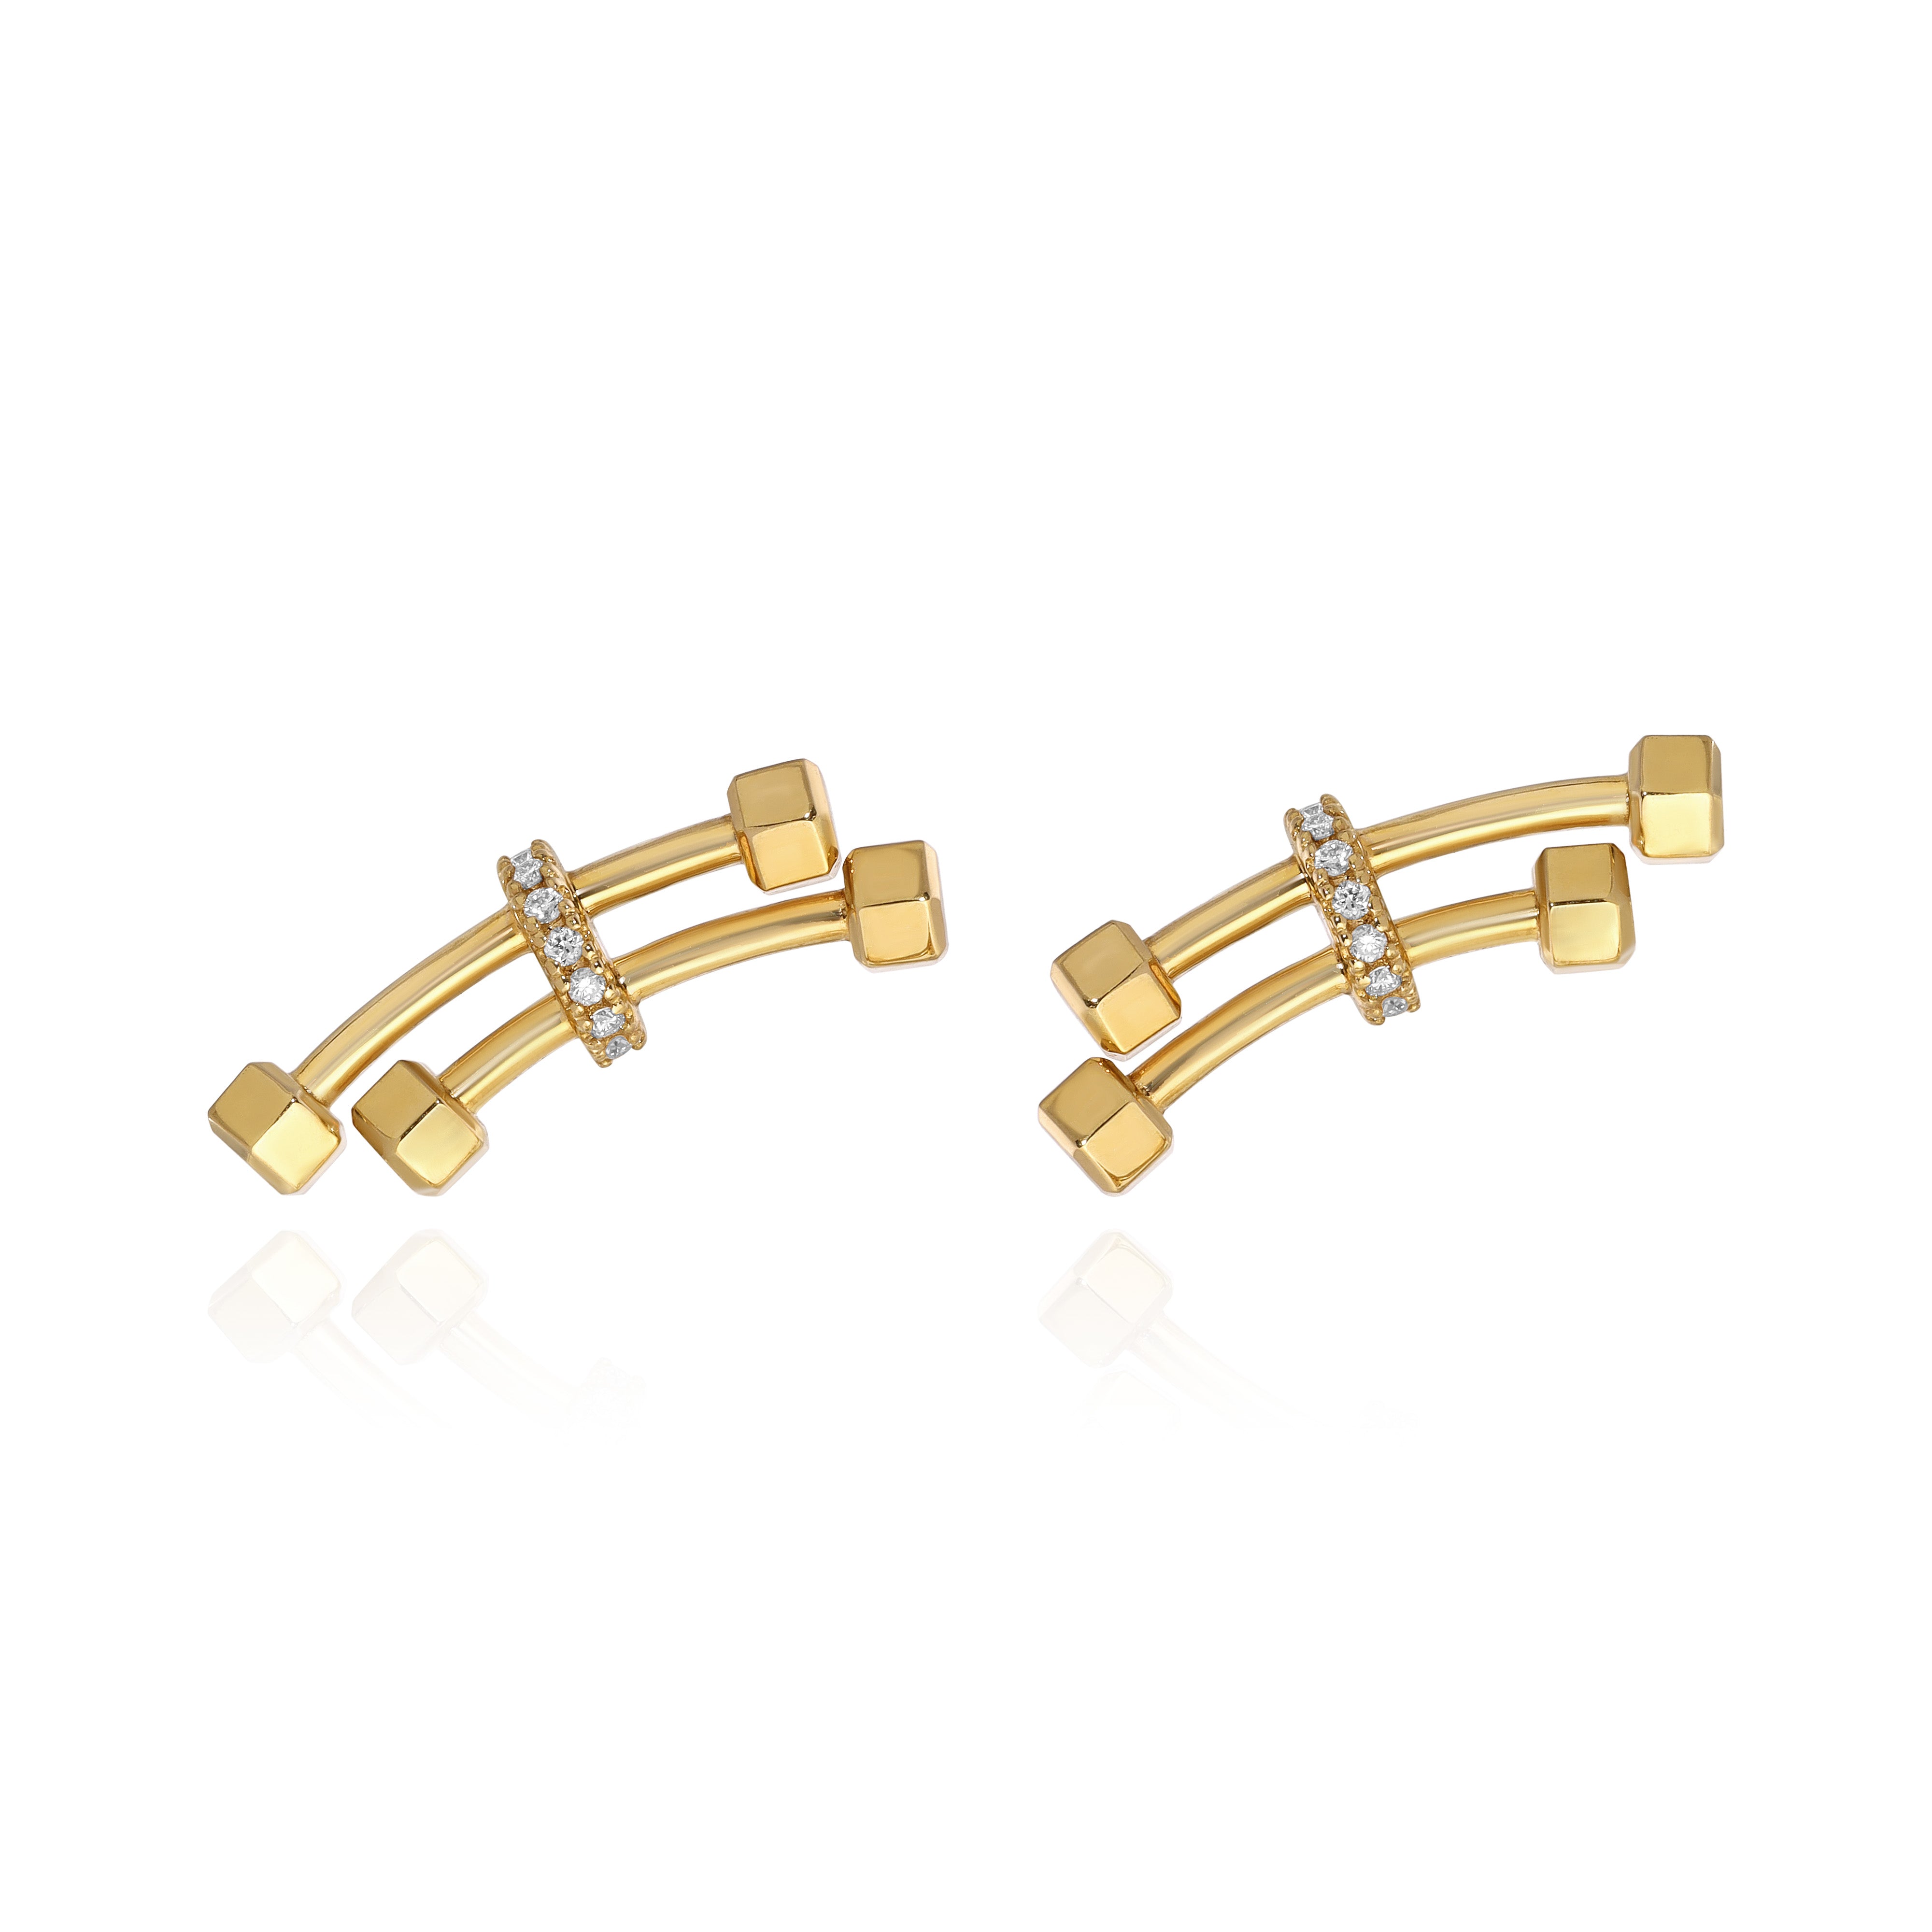 Yellow Gold Earrings with two barbells connected by Diamond encrusted bar, Small